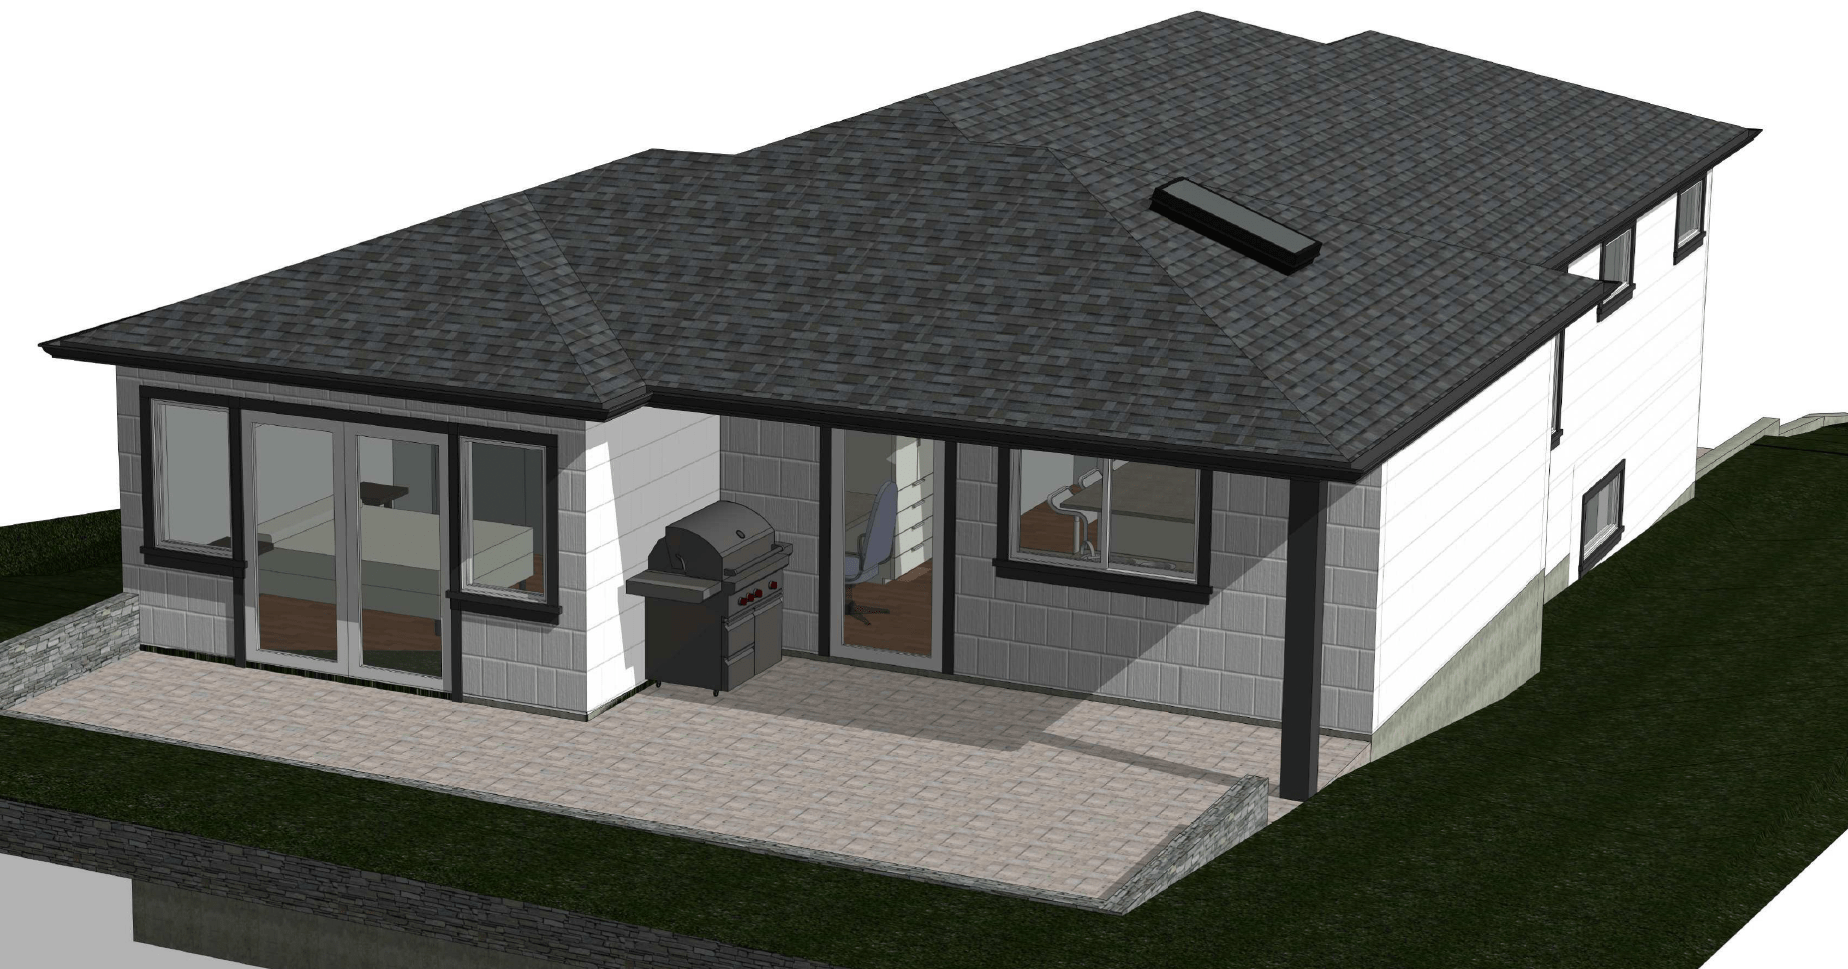 Design rendering of single-level house with back patio and BBQ